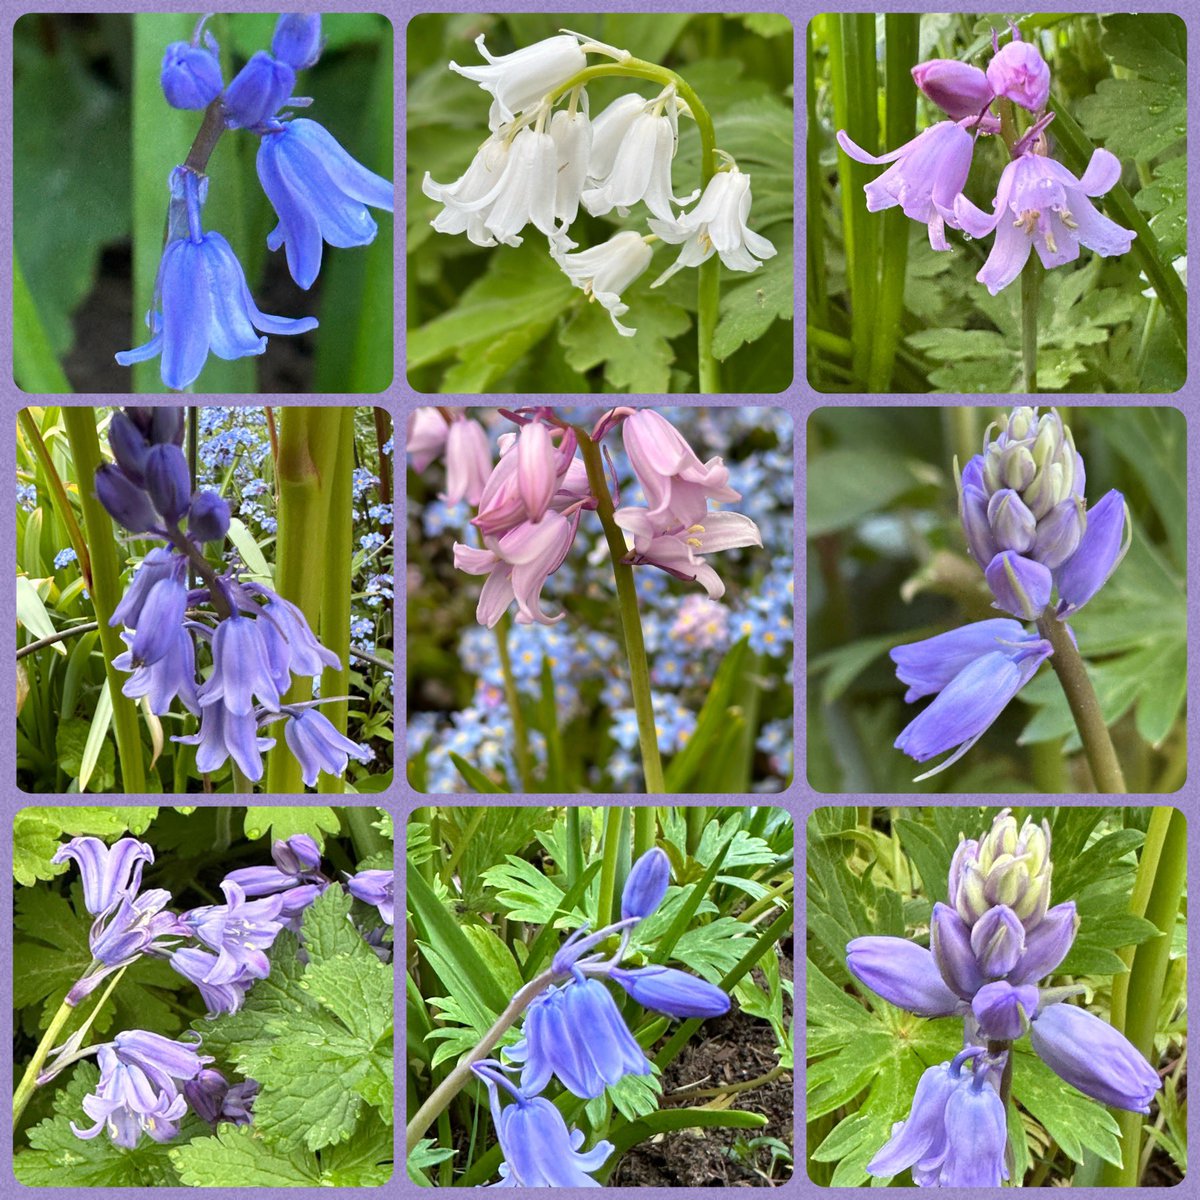 I don’t have many #bluebells in #MyGarden but I love the #flowers and look forward to them spreading.

#SpringFlowers #SpringBulbs #Gardening